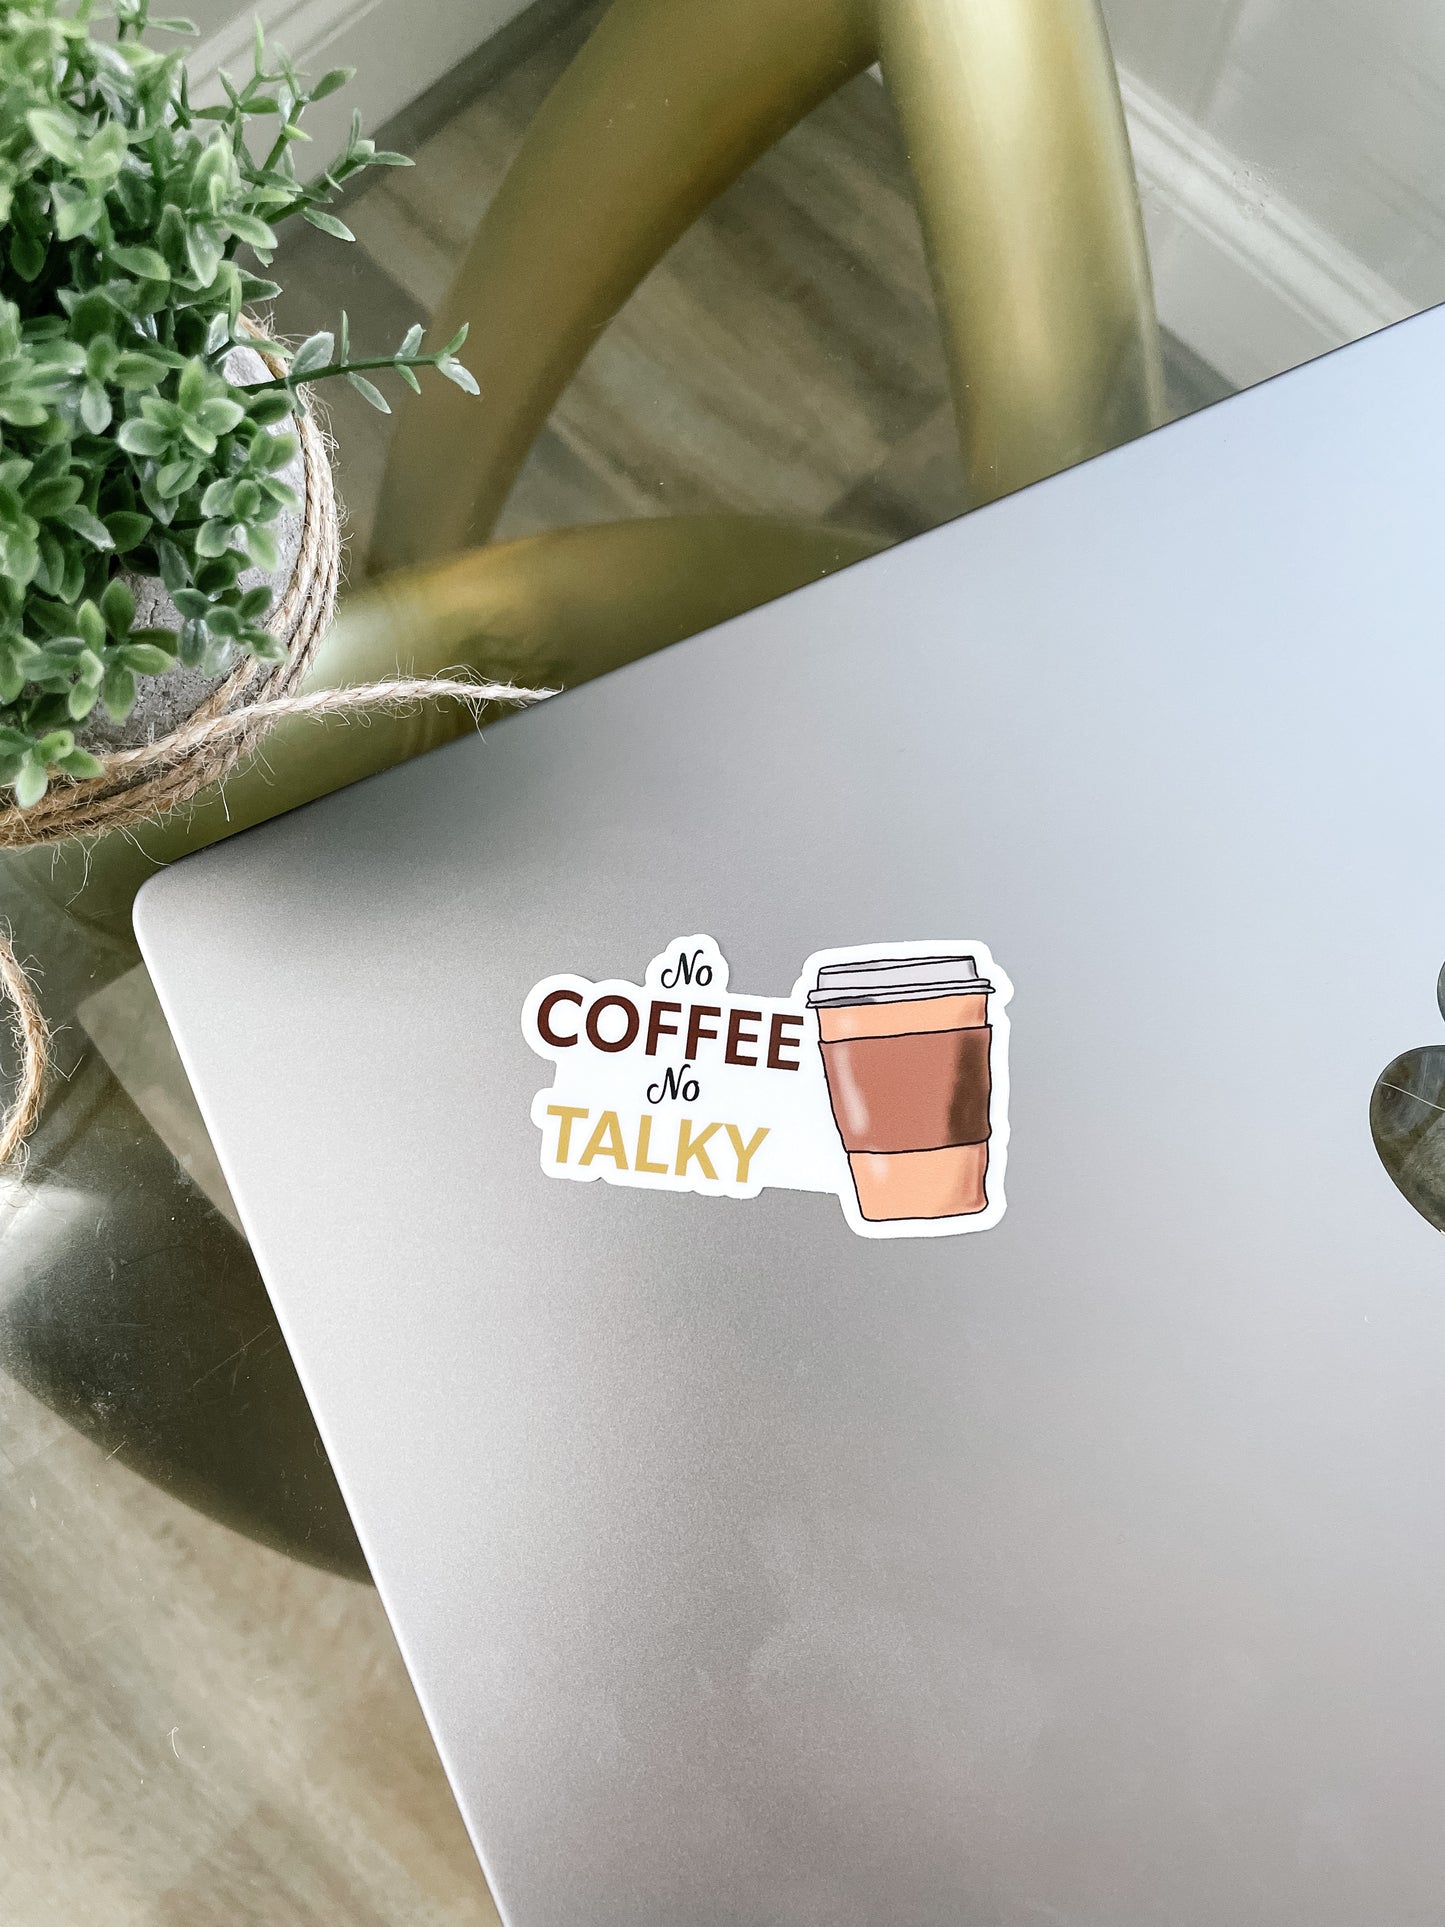 No Coffee No Talky Sticker pictured on laptop